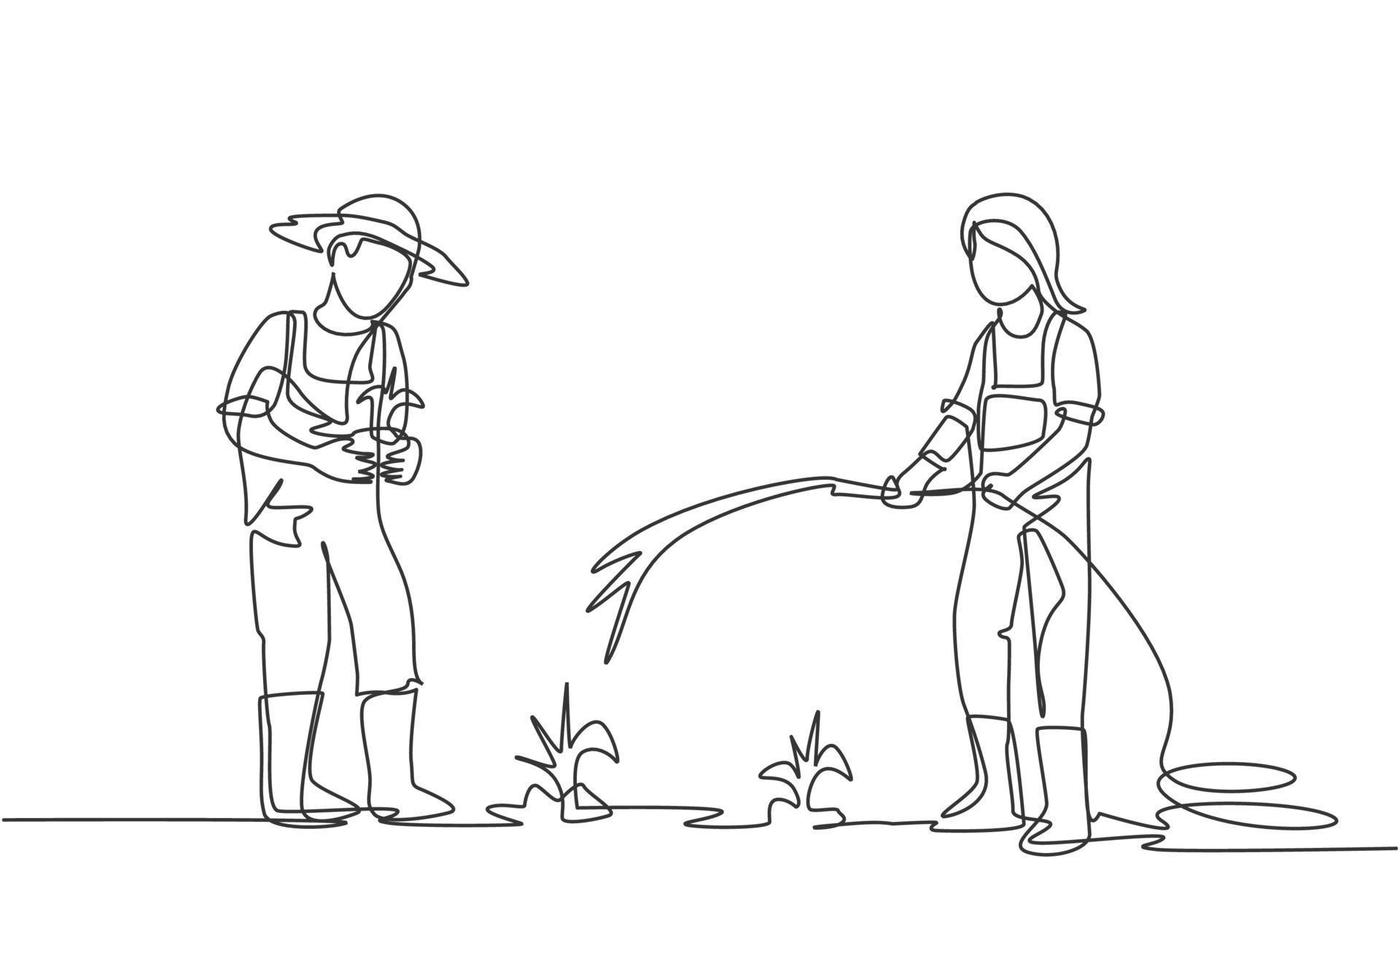 Single continuous line drawing couple farmer watering the plants using a hose and planting new plants. Farmer planting activities concept. Dynamic one line draw graphic design vector illustration.